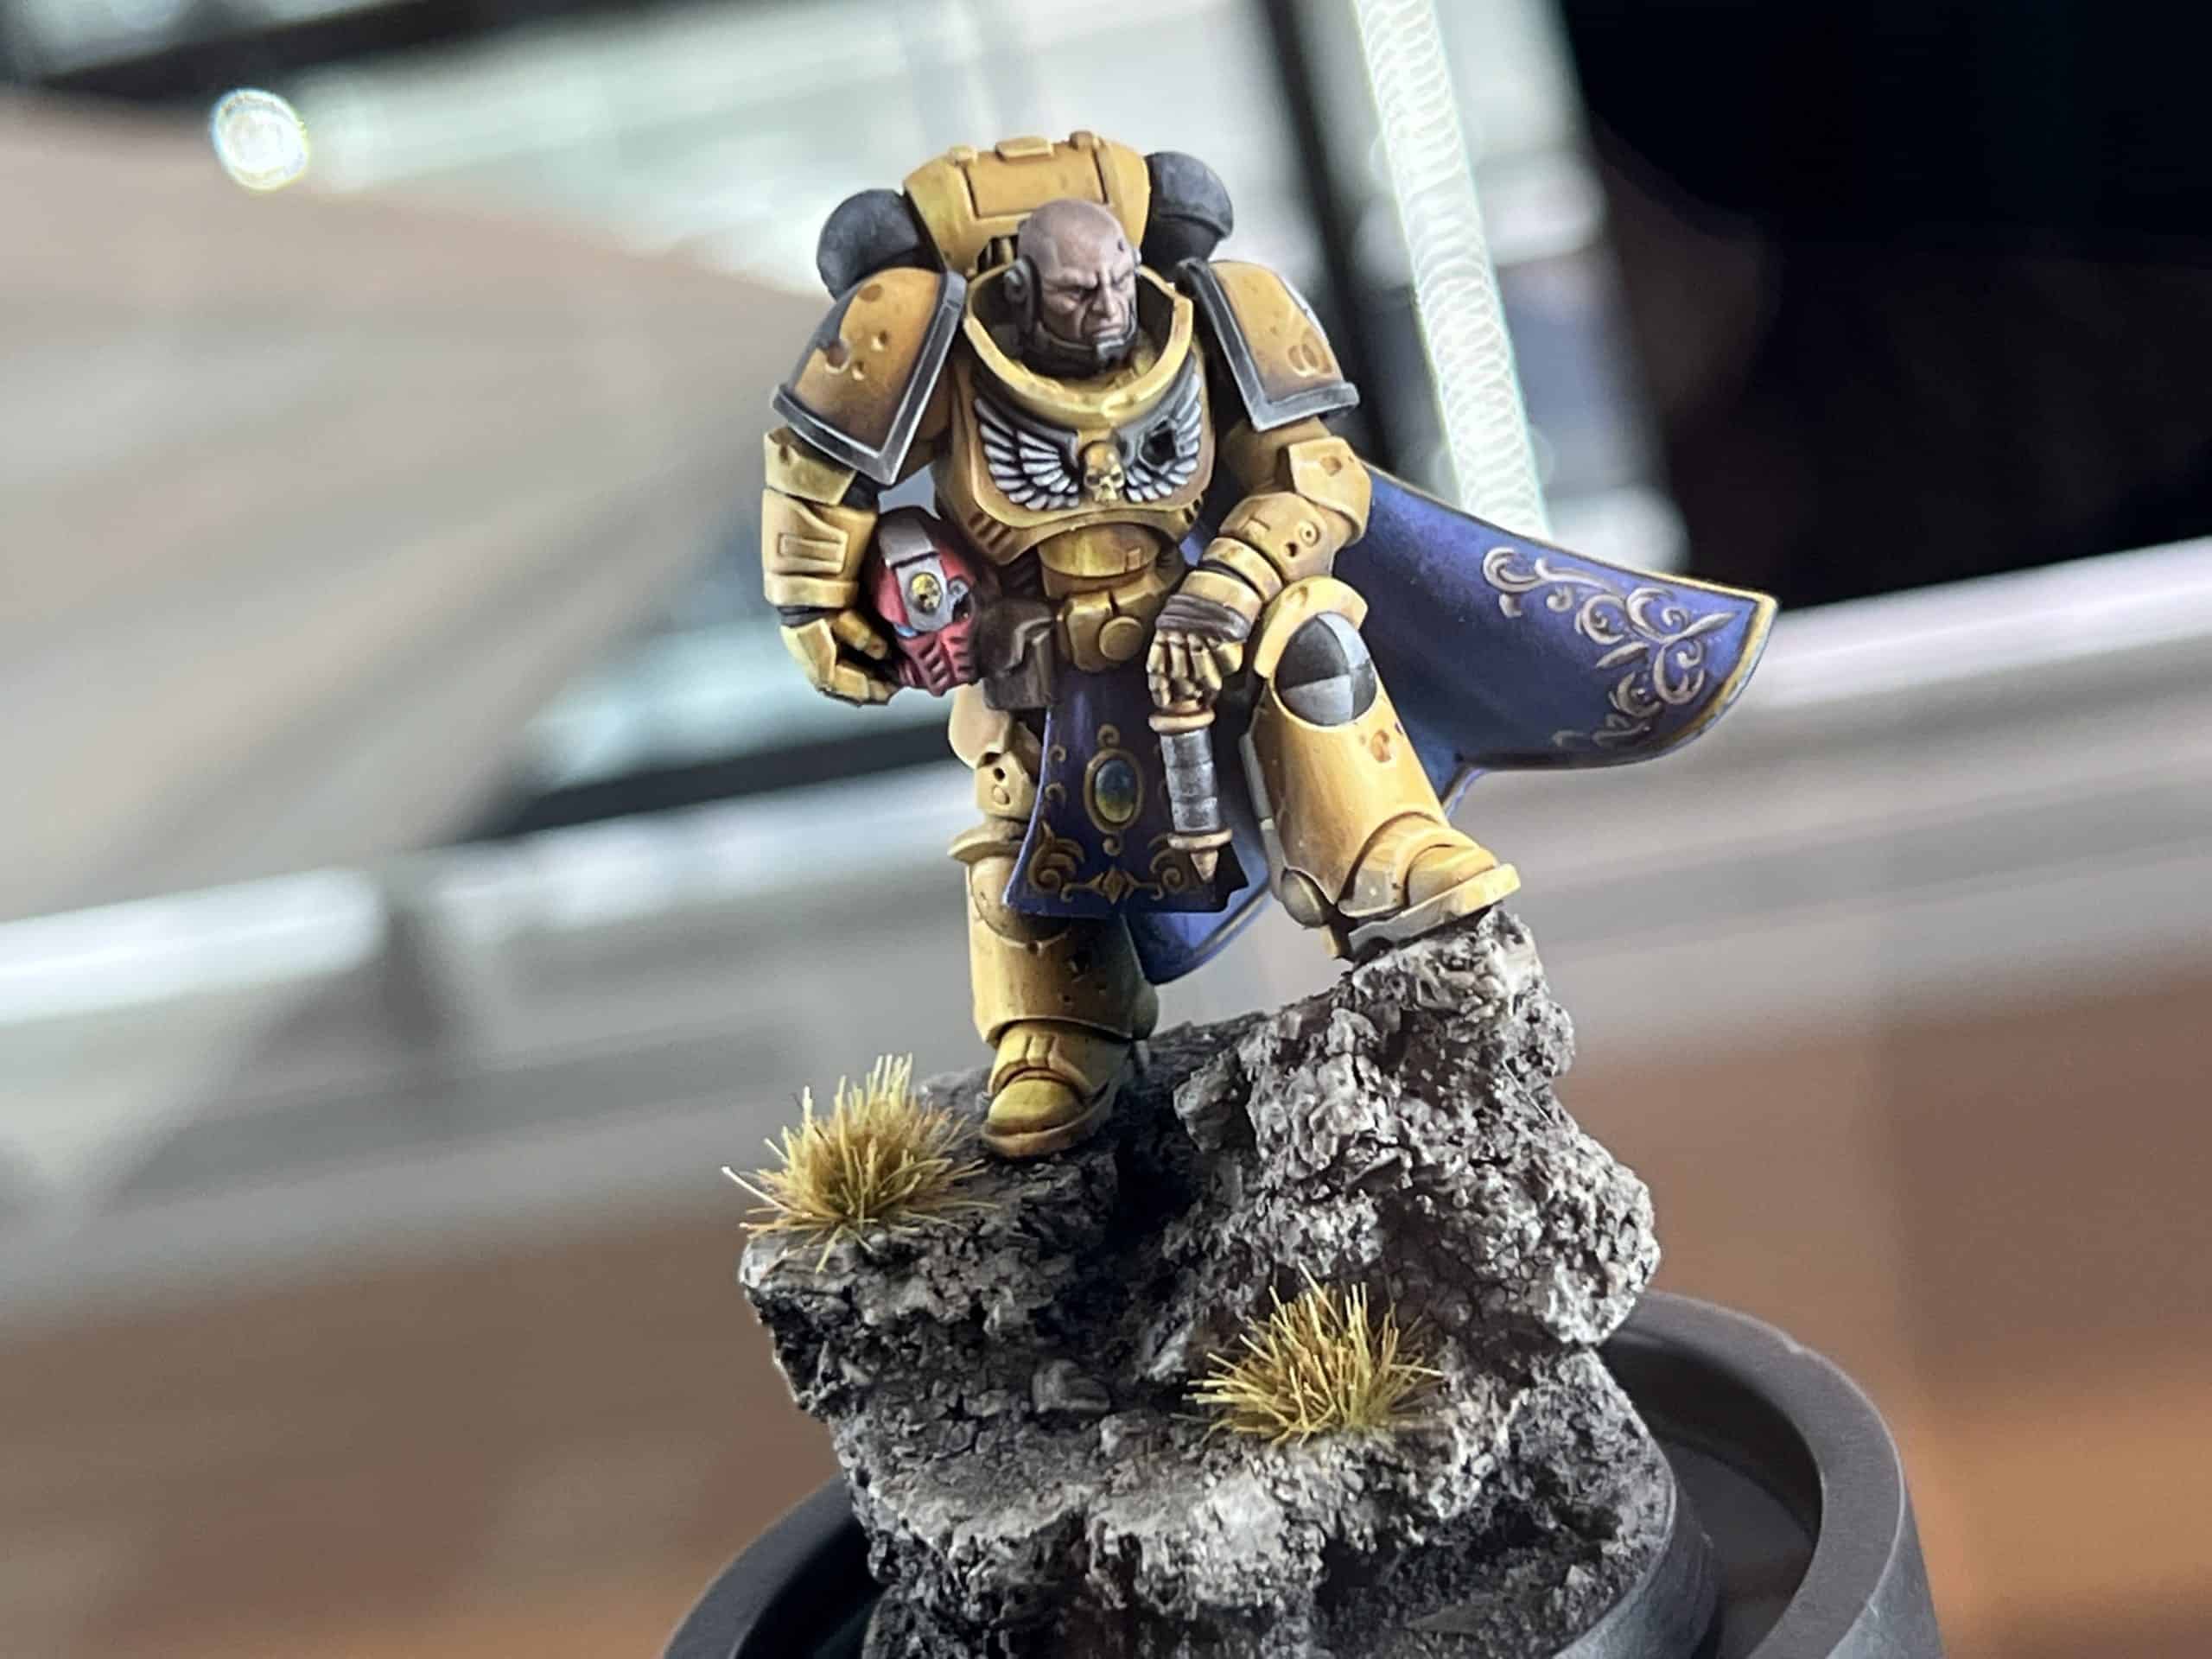 The AdeptiCon 2022 Golden Demon is Full of Amazing Minis!